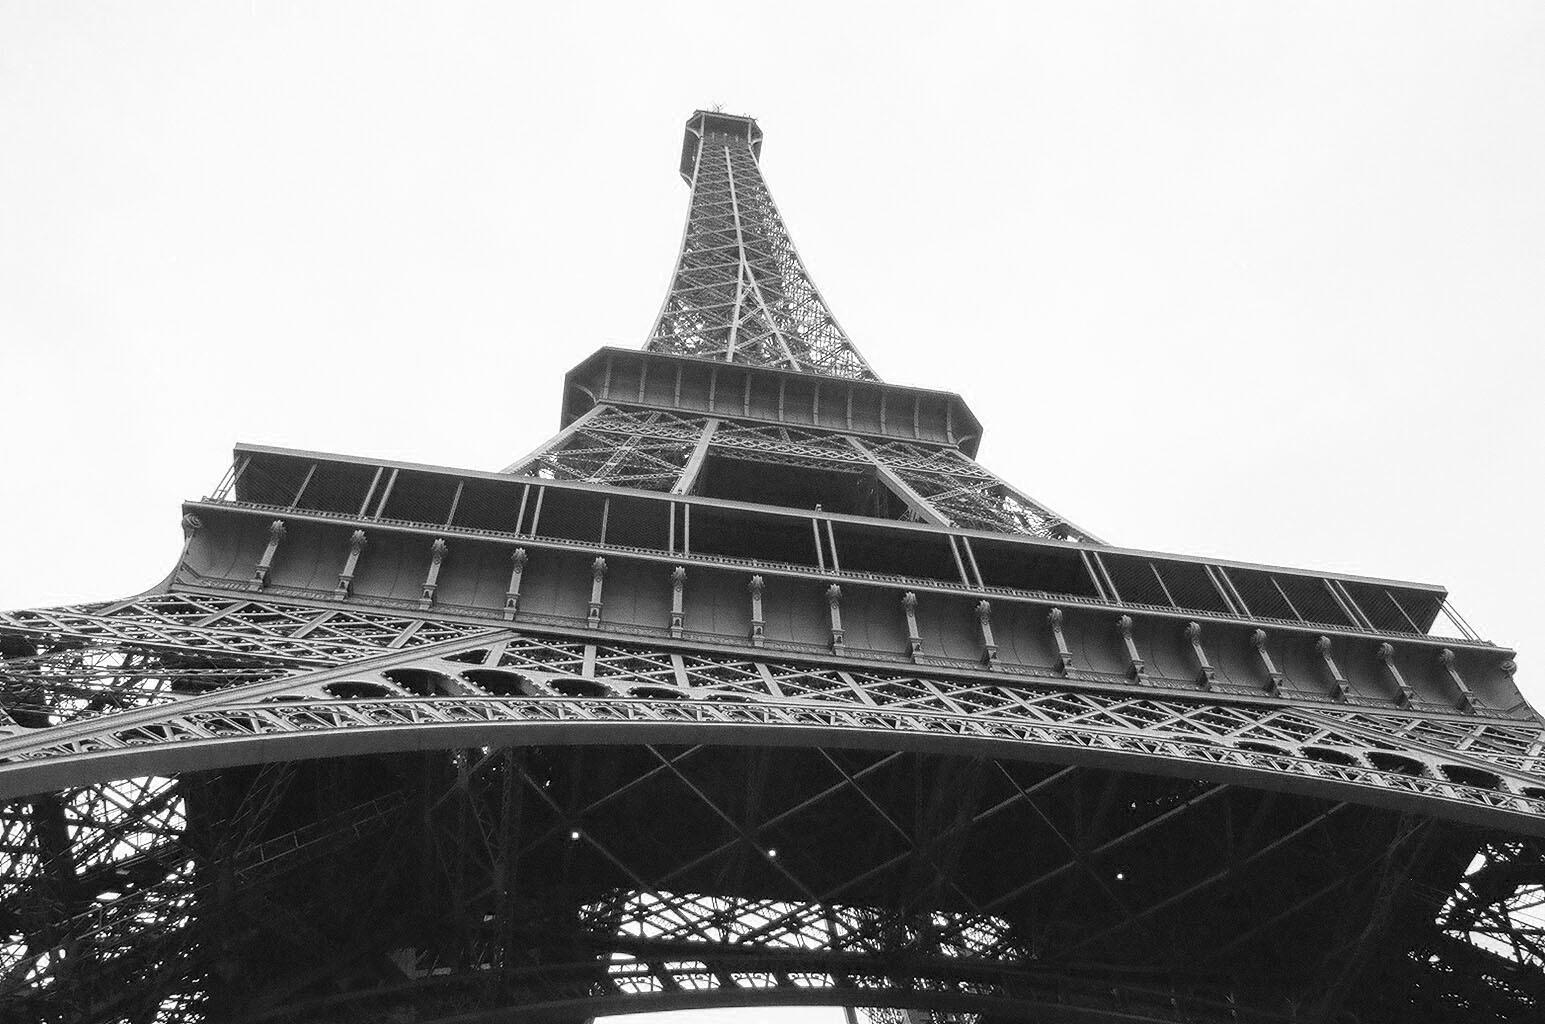 The Eiffel Tower from below in Paris France